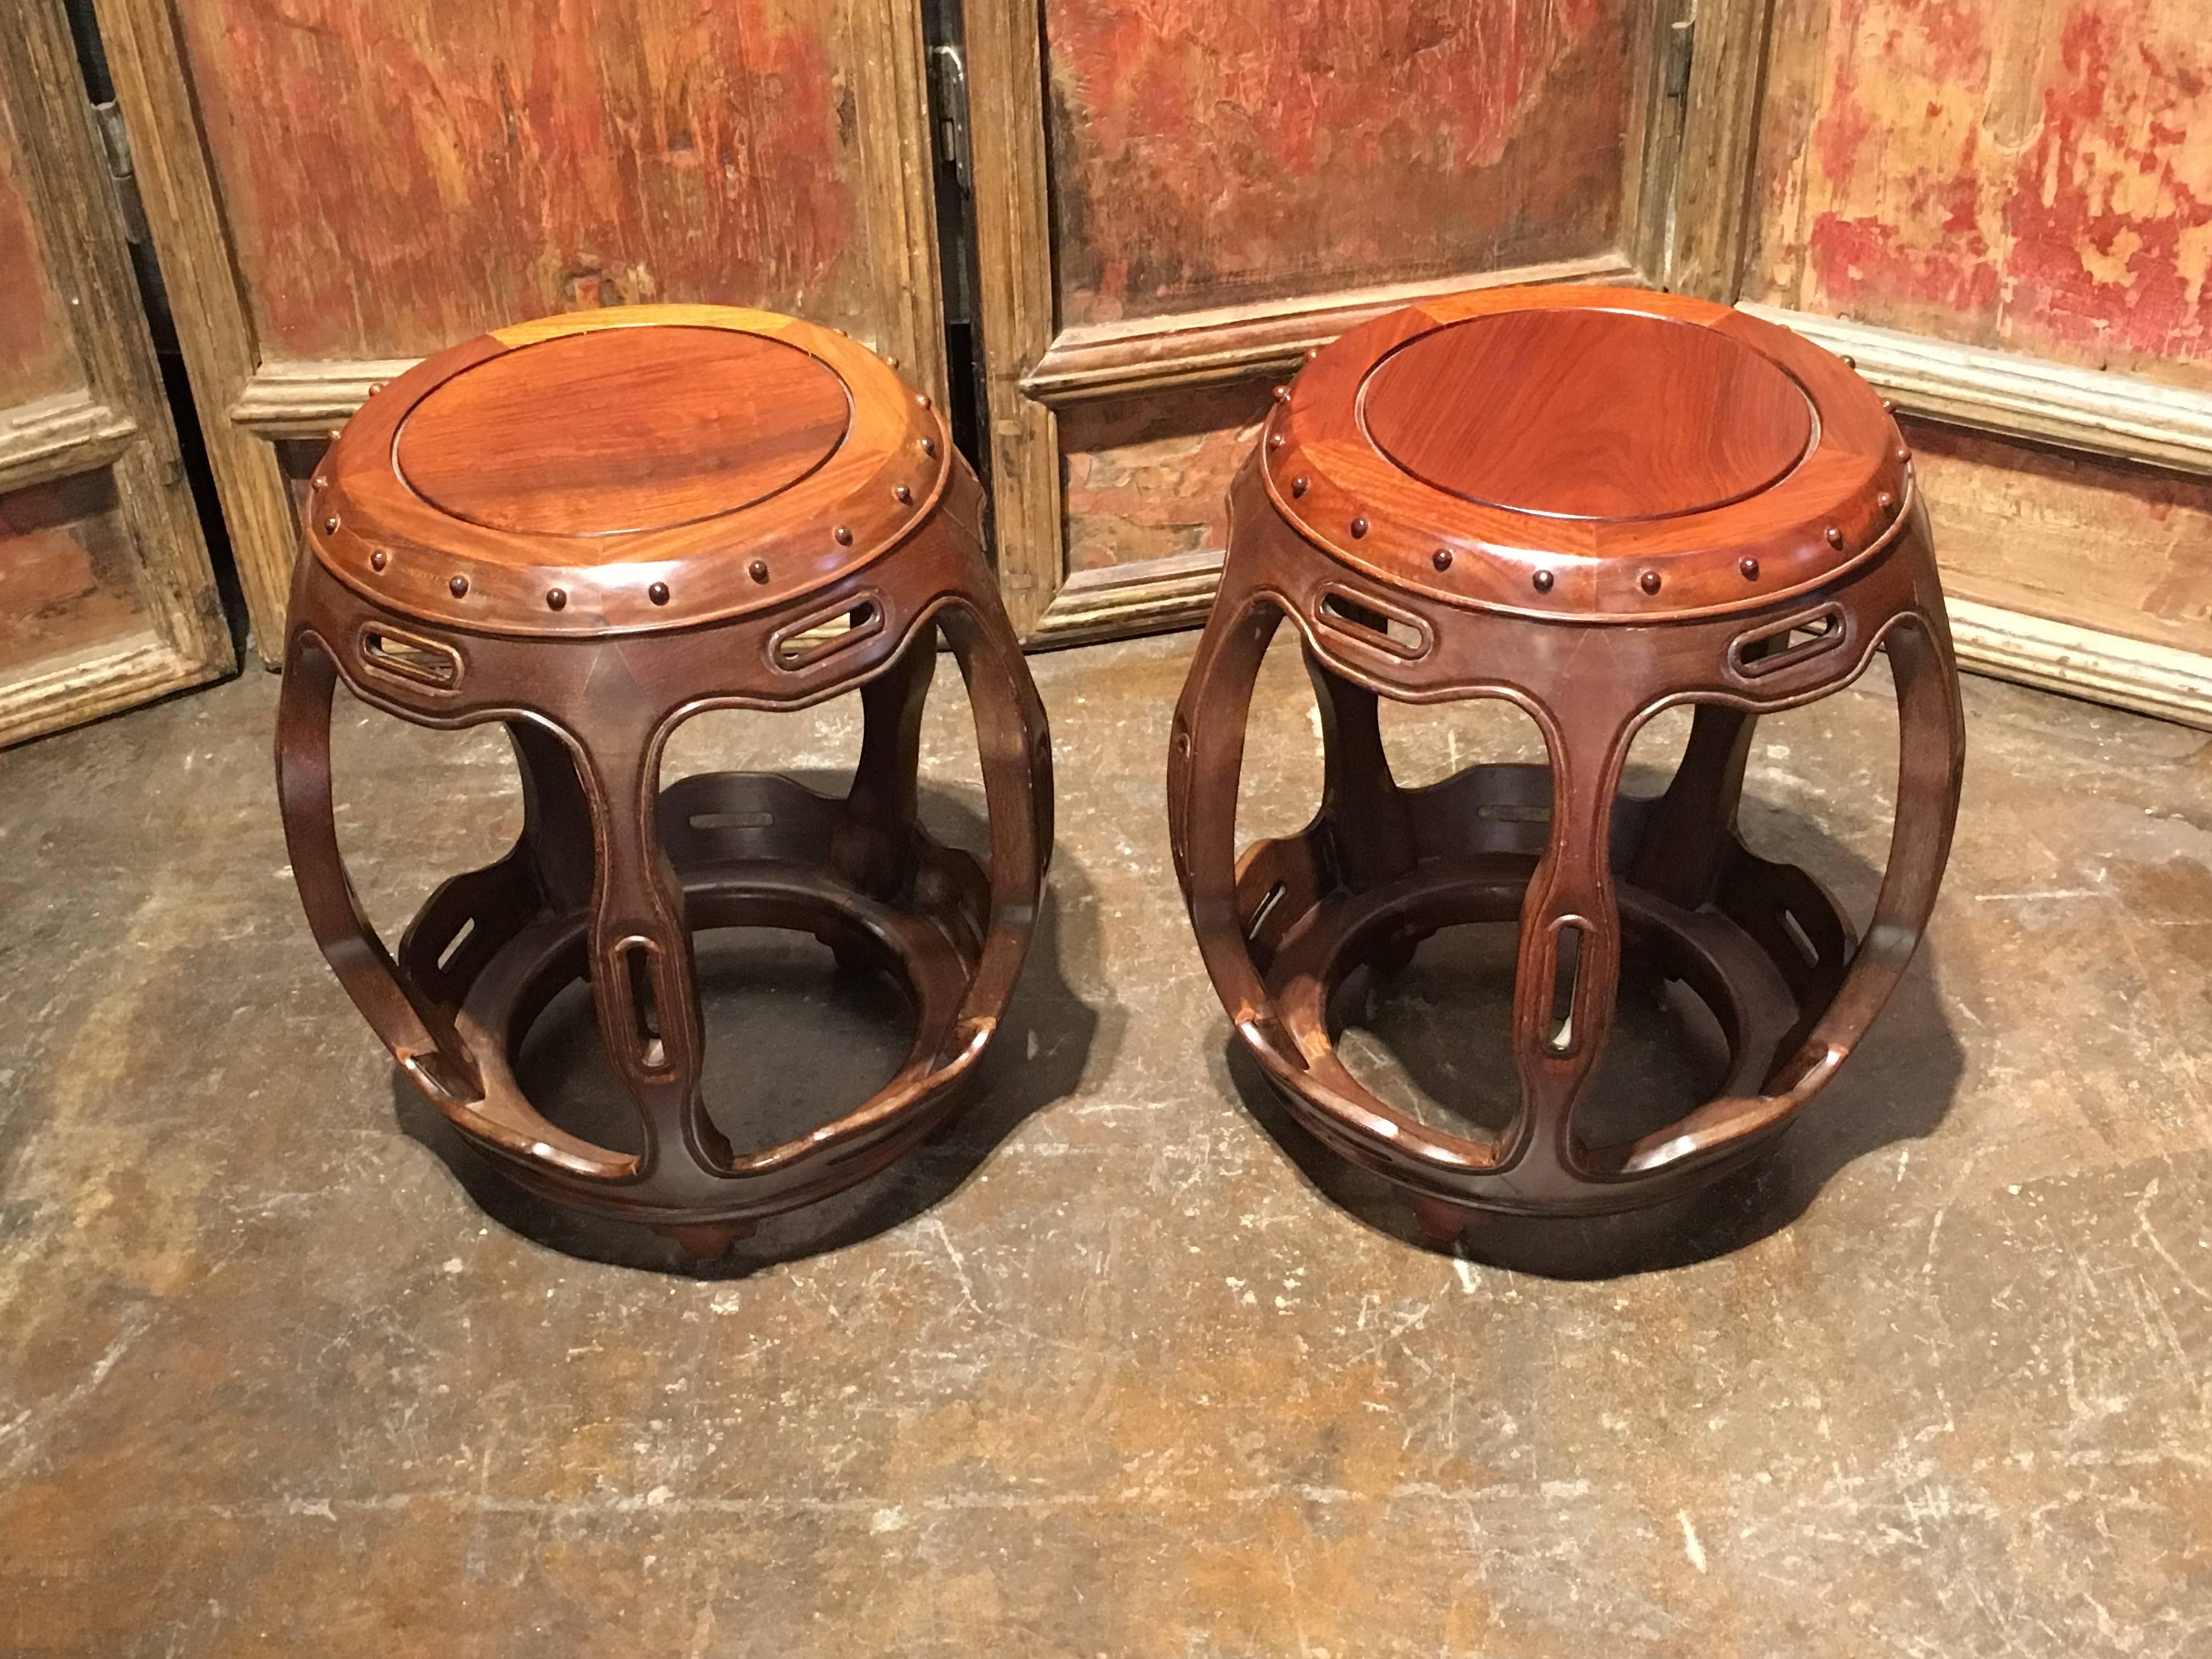 An elegant pair of late Qing dynasty Chinese drum-form barrel stools made of precious hongmu, a type of rosewood.
Suitable for use as either stools or side tables, the pierced ribs curve slightly outward, accentuating the overall roundness of the